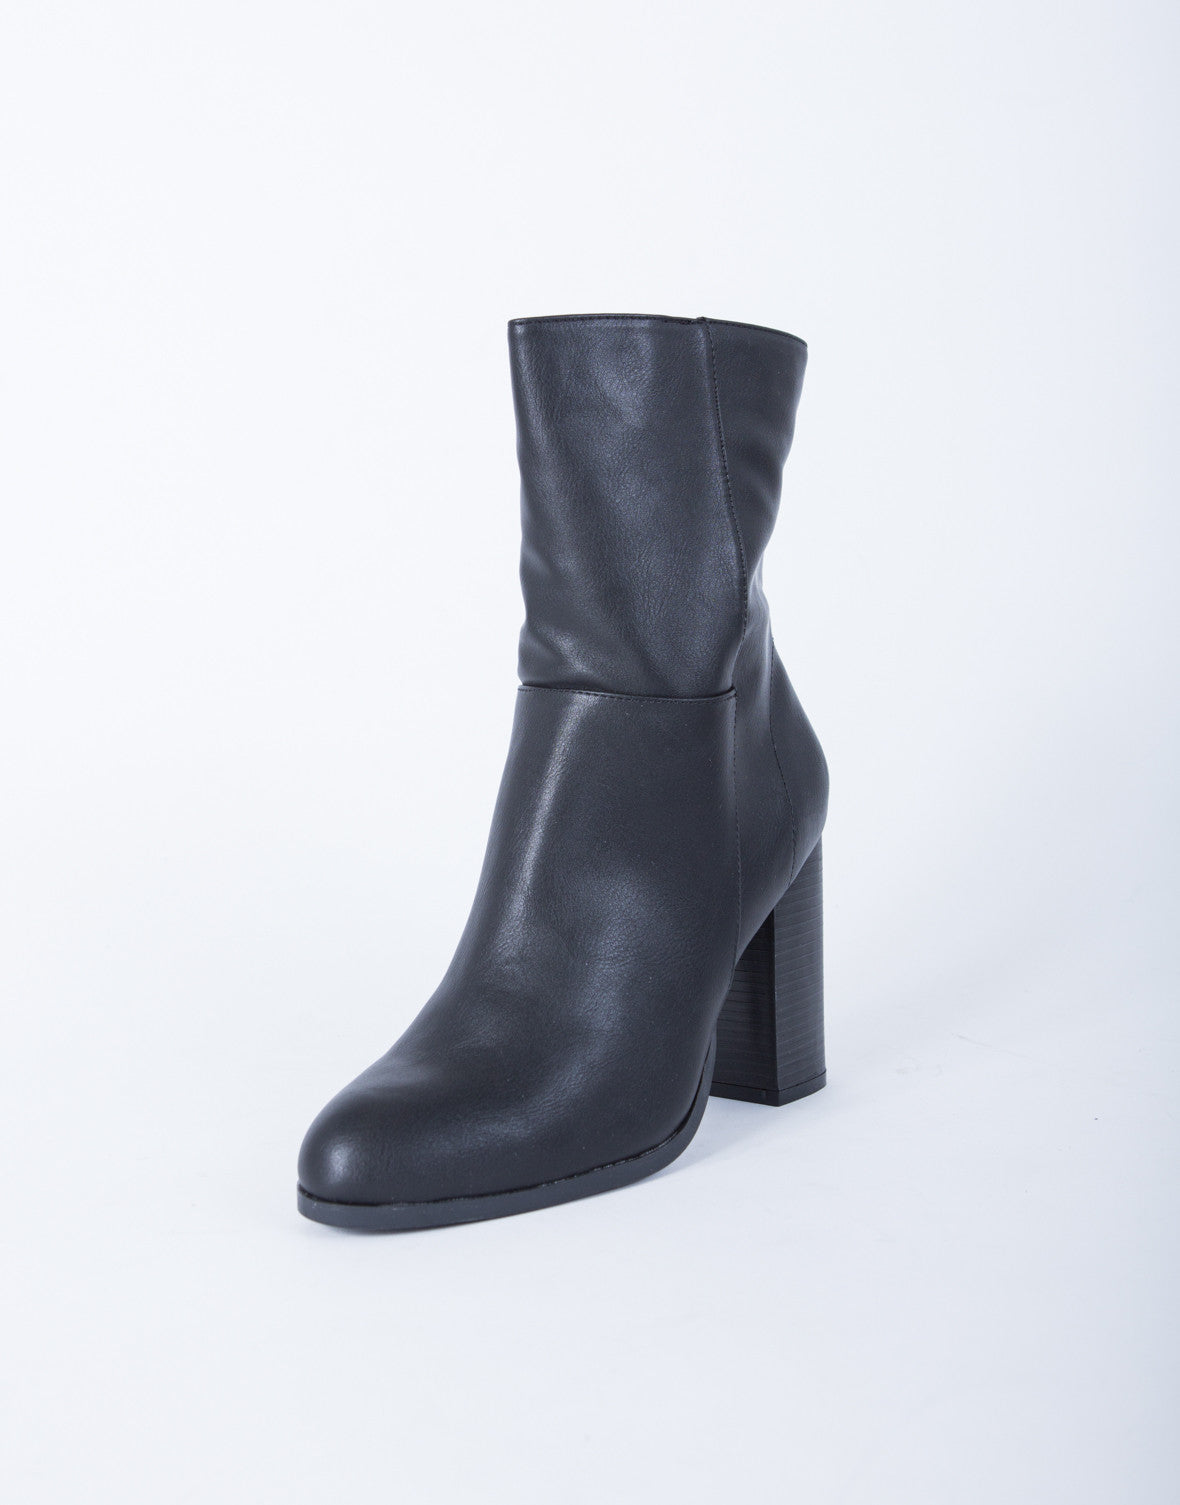 Classic Heel Boots - Black Leather Boots - Faux Leather Heel Boots ...